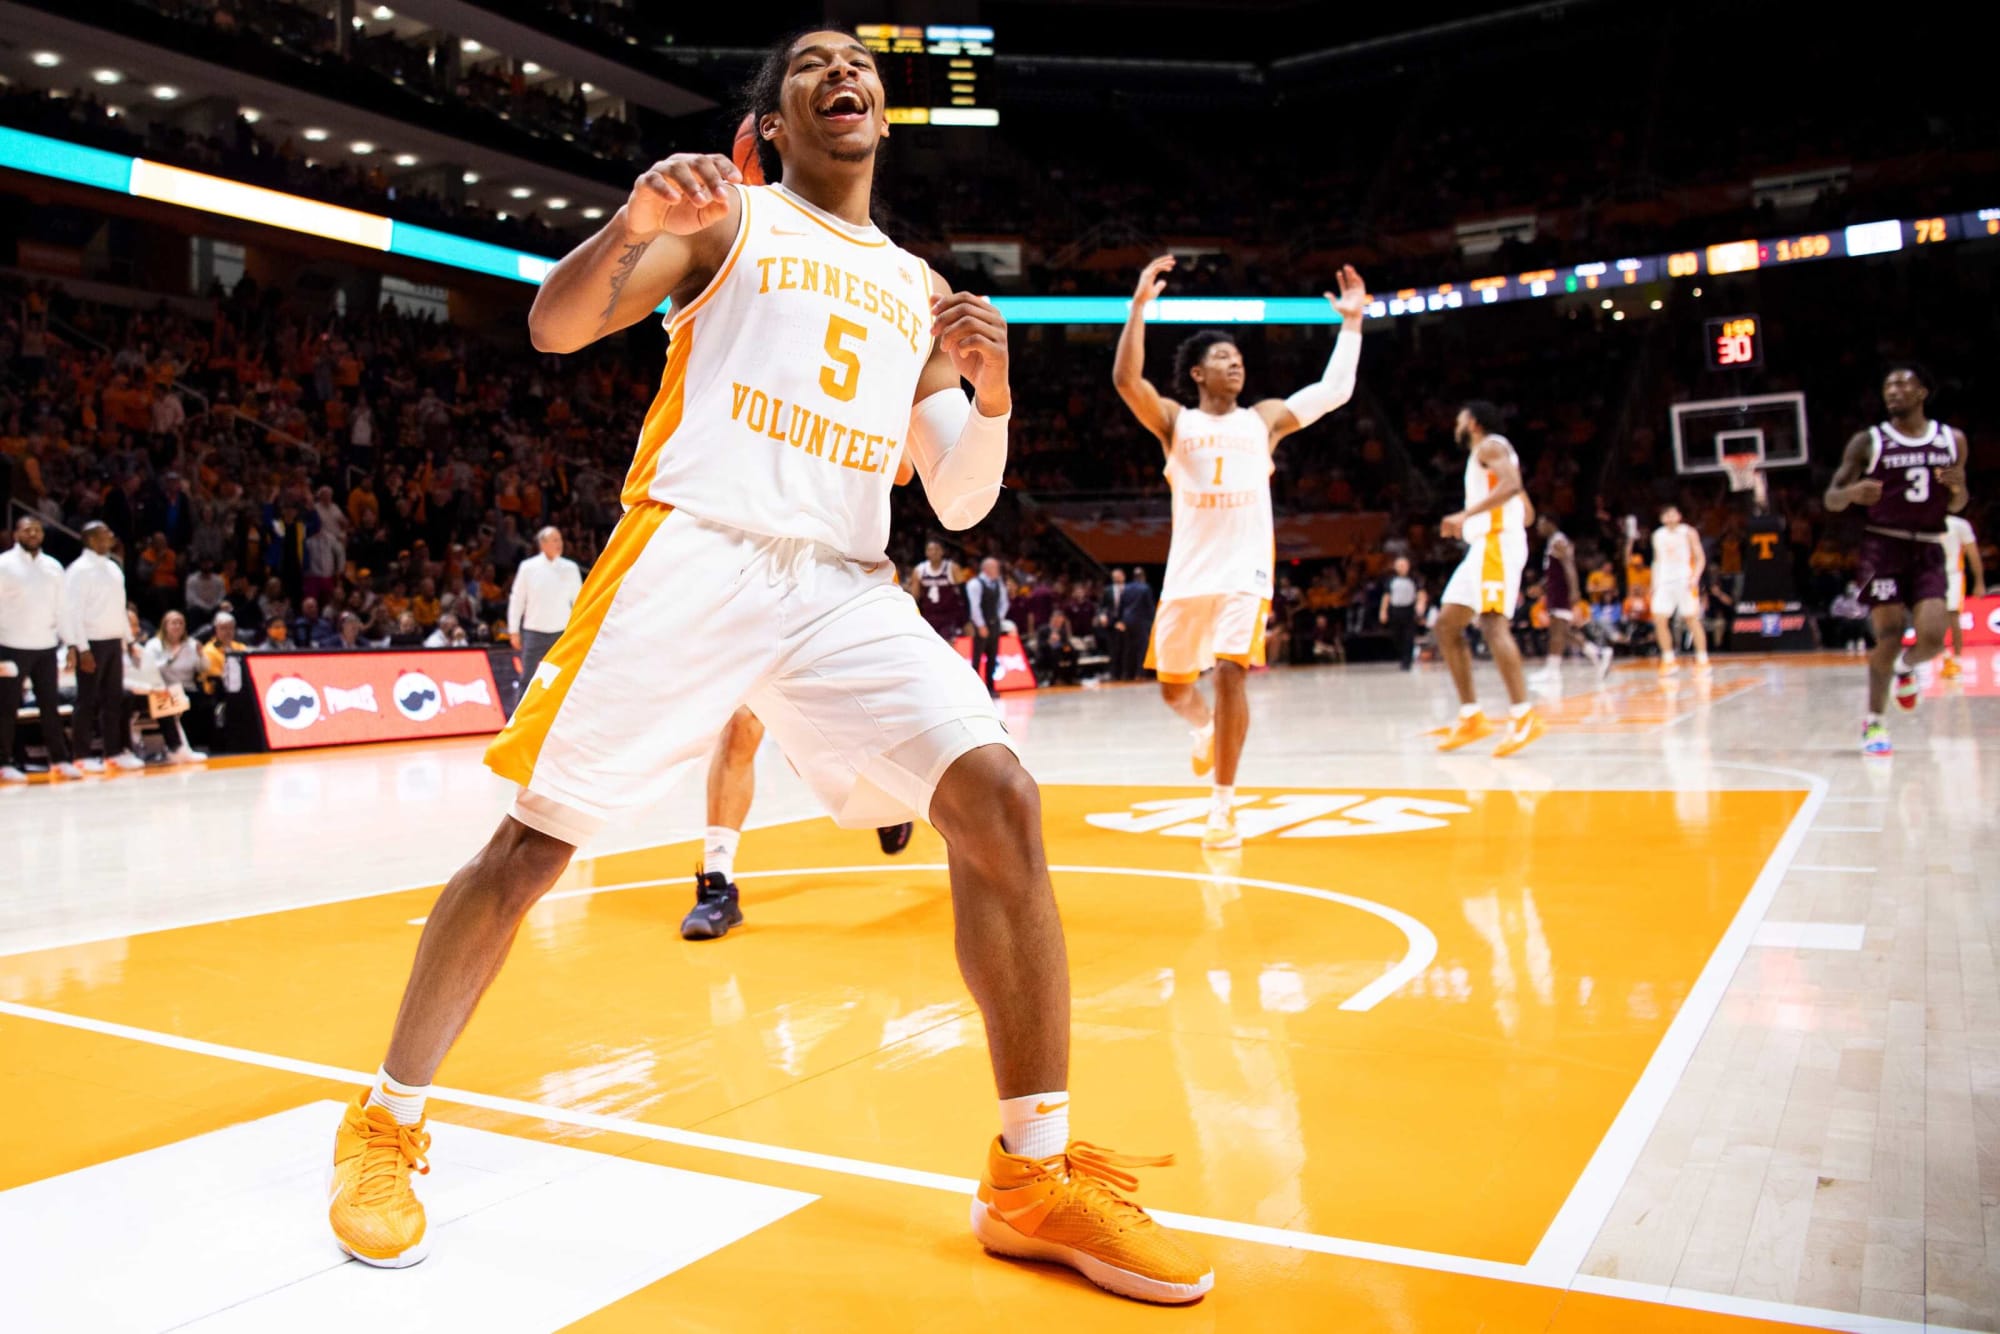 Tennessee Basketball: How the Vols matchup against each top 10 team